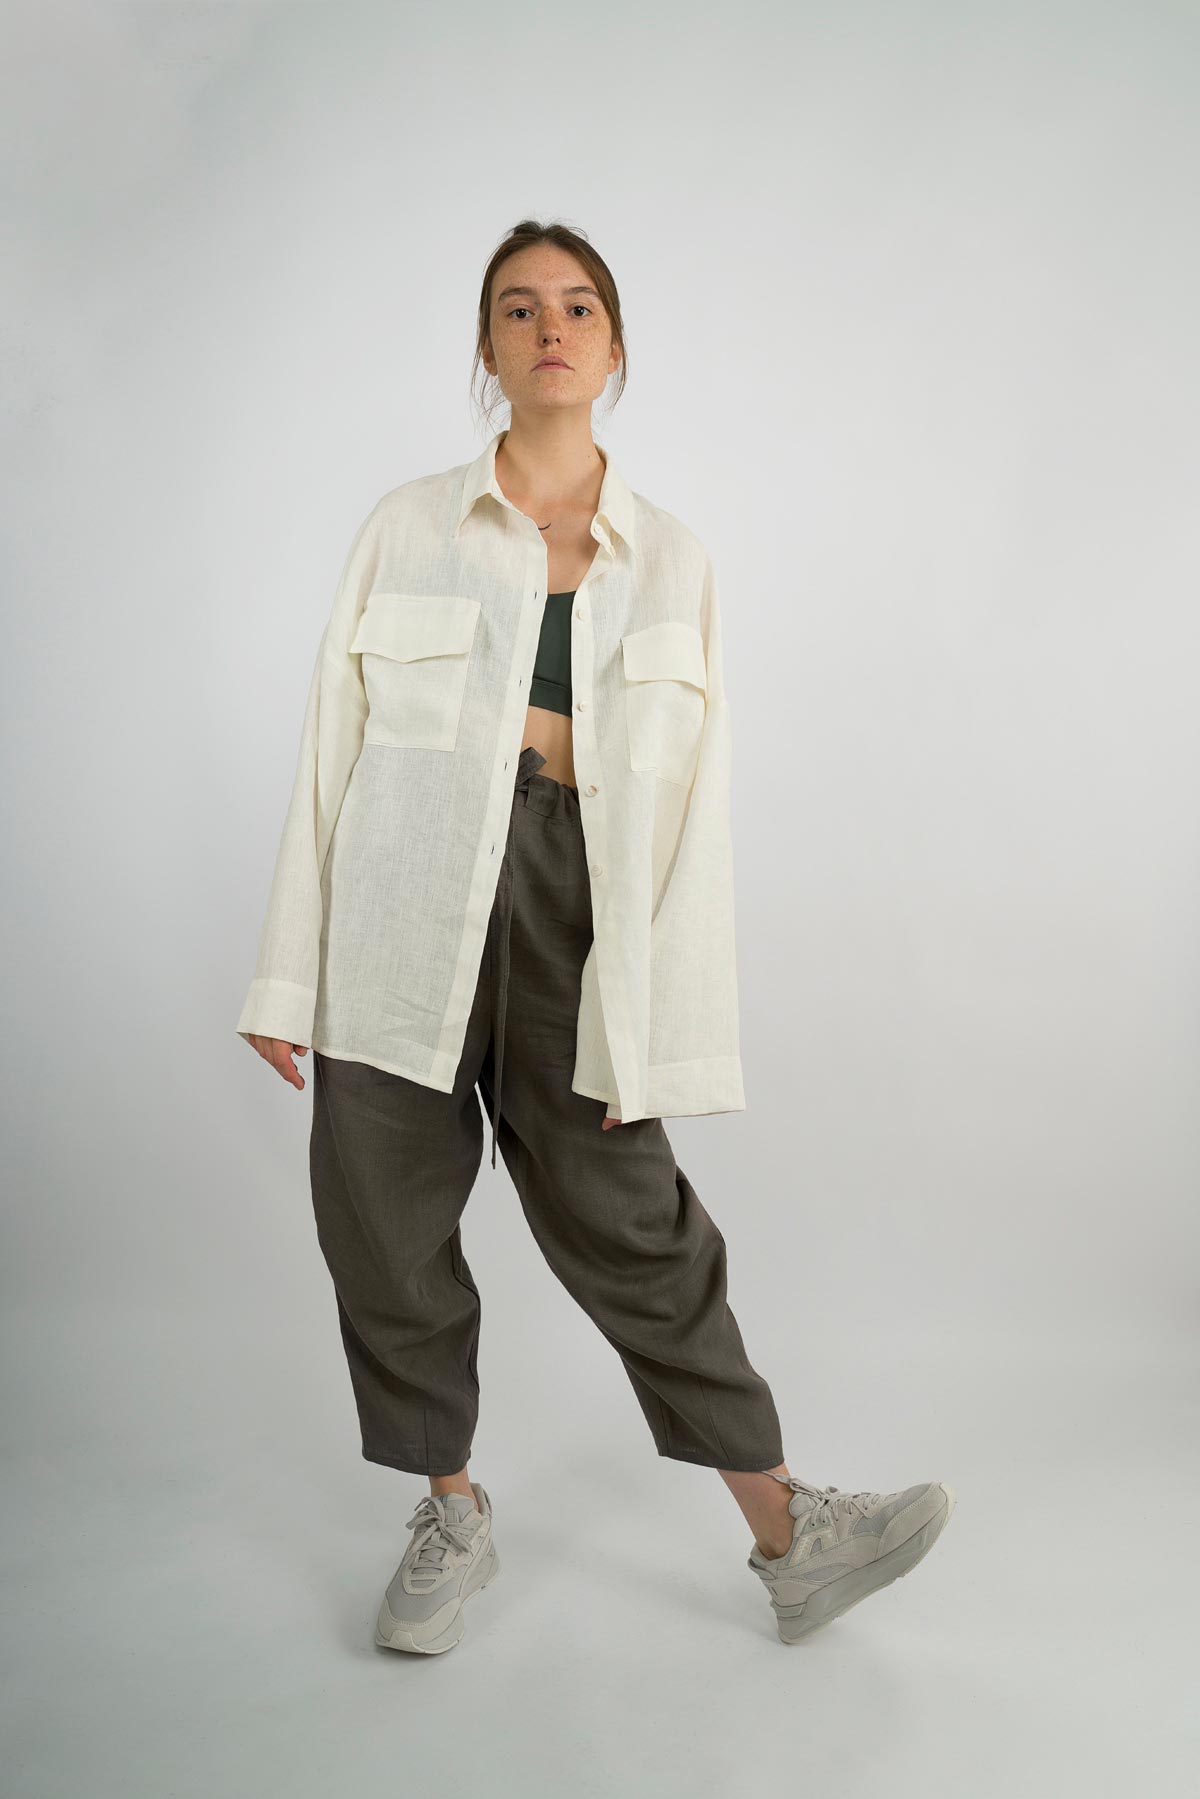 white linen shirt and graphire pants